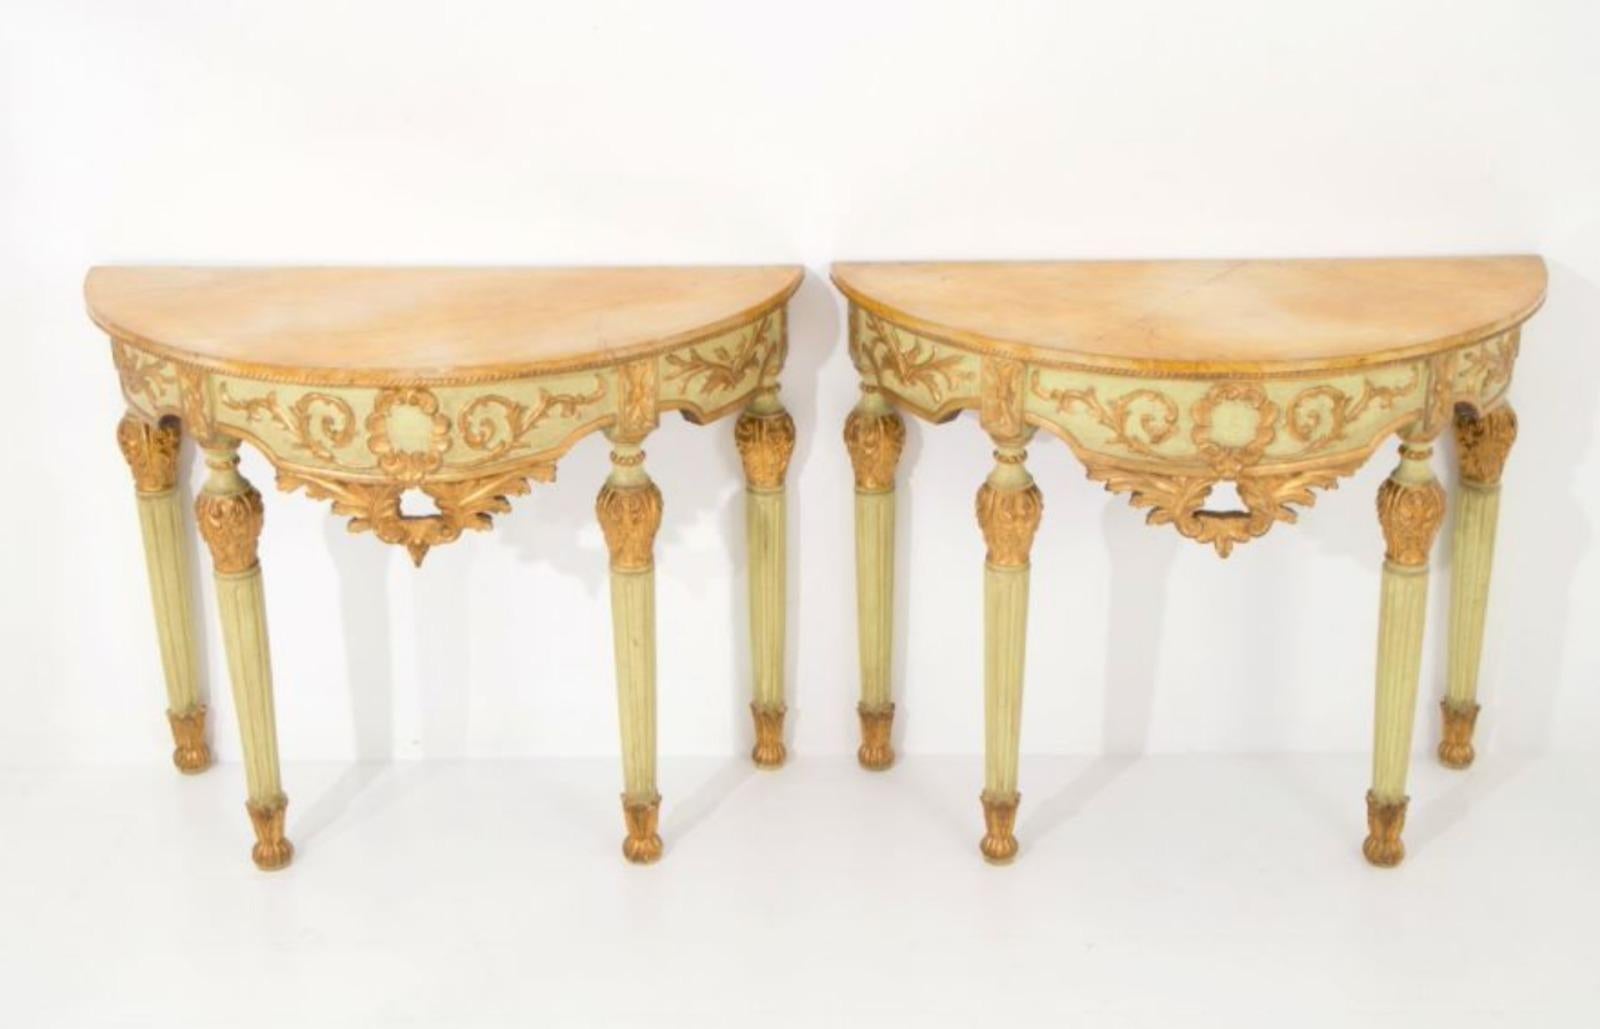 Pair of 19th century Italian console tables
90x117x55cm
Half-moon console in carved, lacquered and gilded wood.
Good condition for the age.